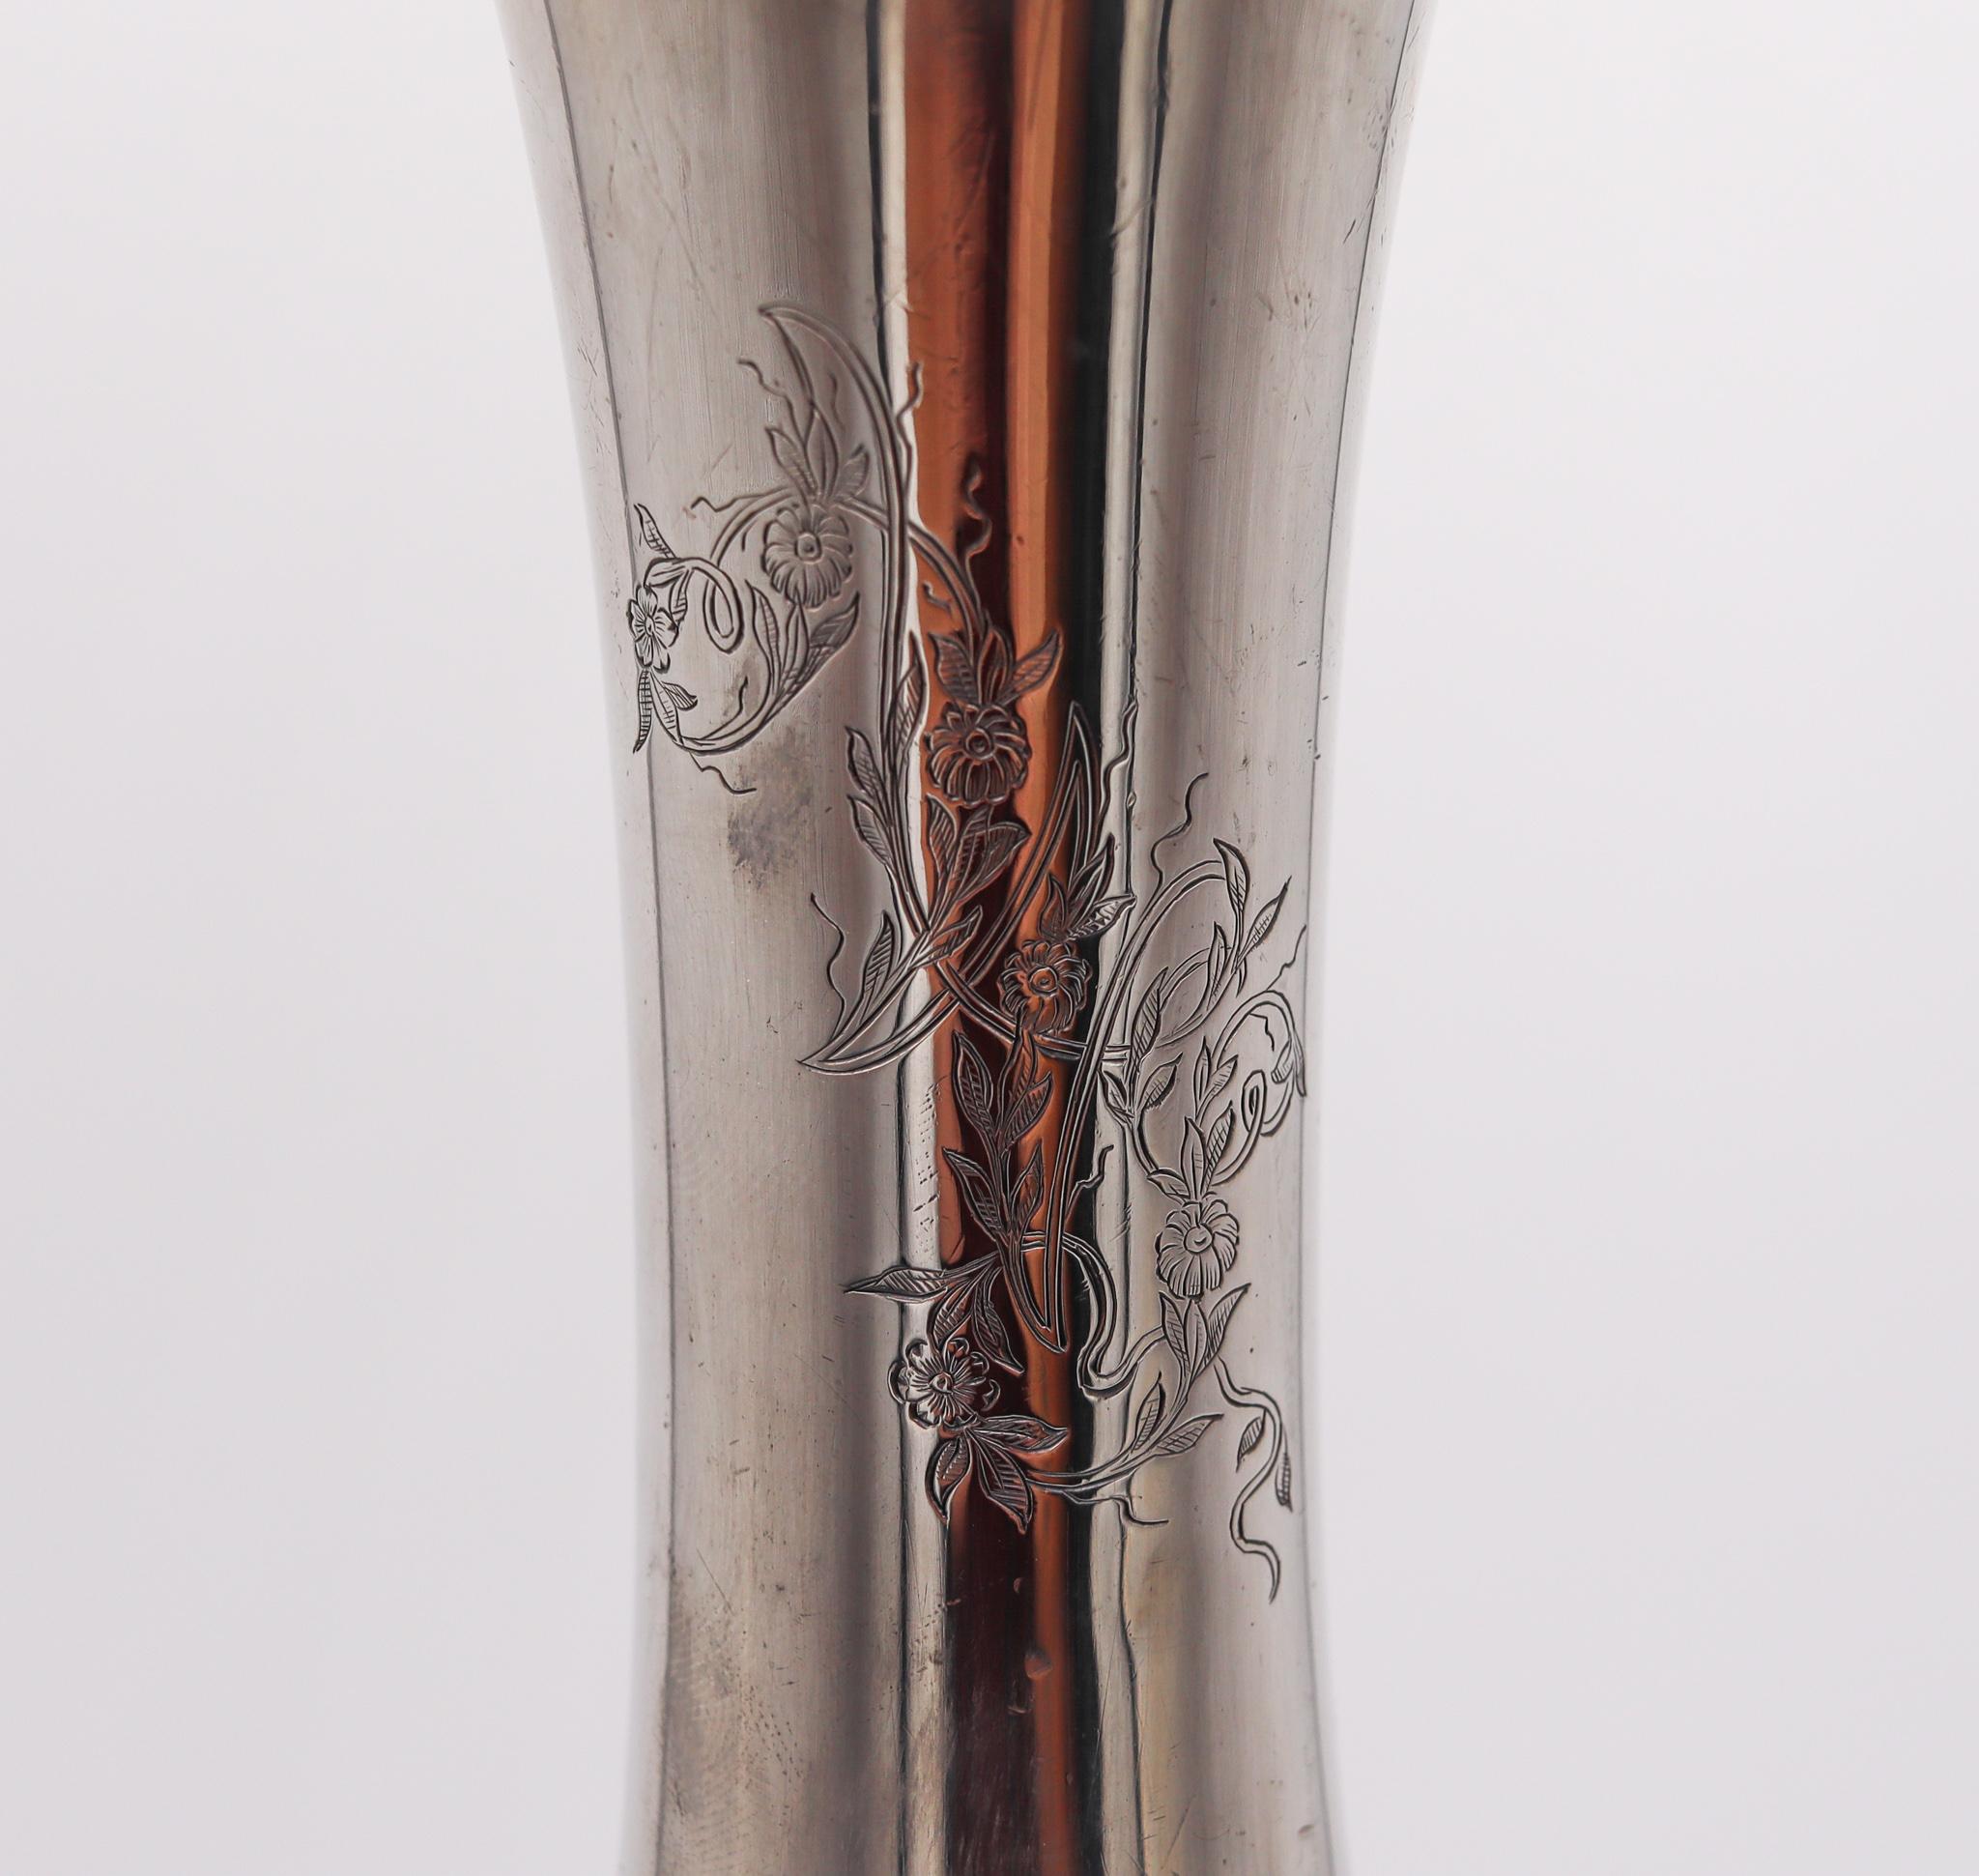 Tiffany & Co. 1900 Charles L Tiffany Edwardian Art Nouveau Sterling Trumpet Vase In Excellent Condition For Sale In Miami, FL